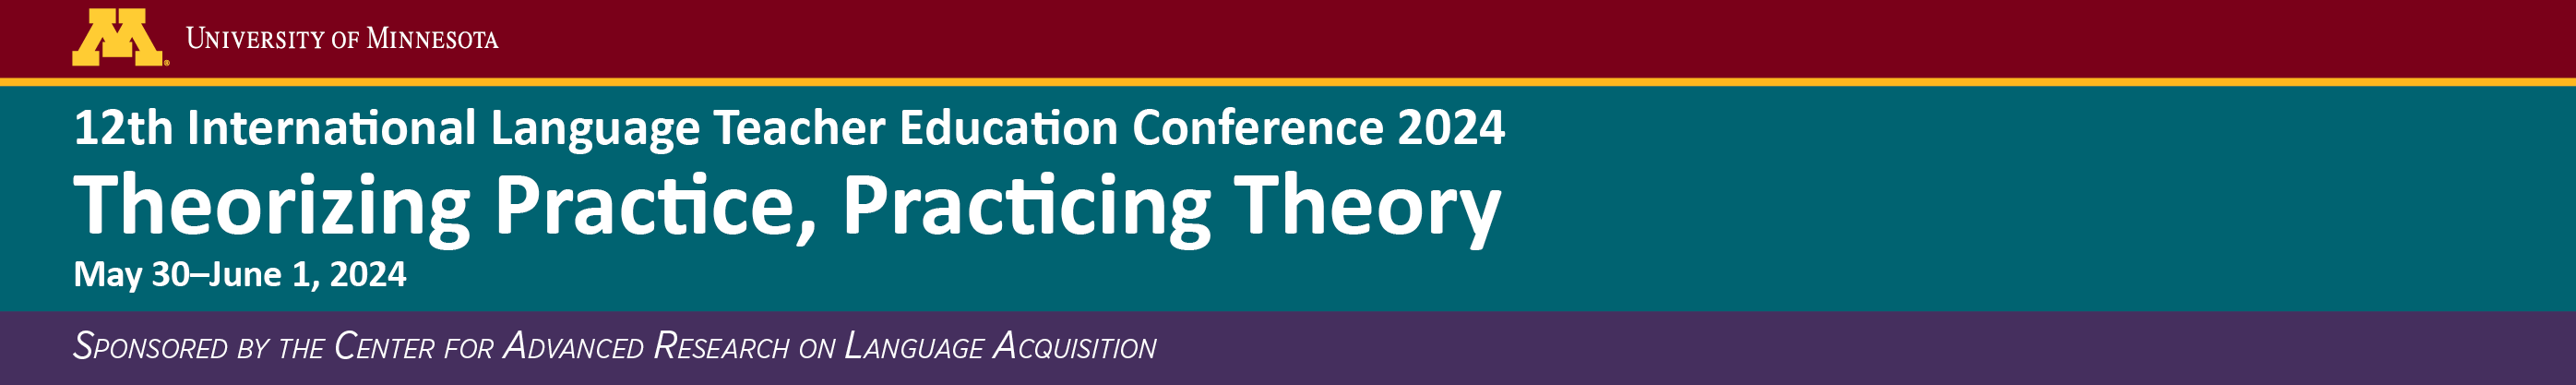 12th International Language Teacher Education Conference: Theorizing Practice, Practicing Theory: at CARLA at the University of Minnesota May 30-June 1, 2024